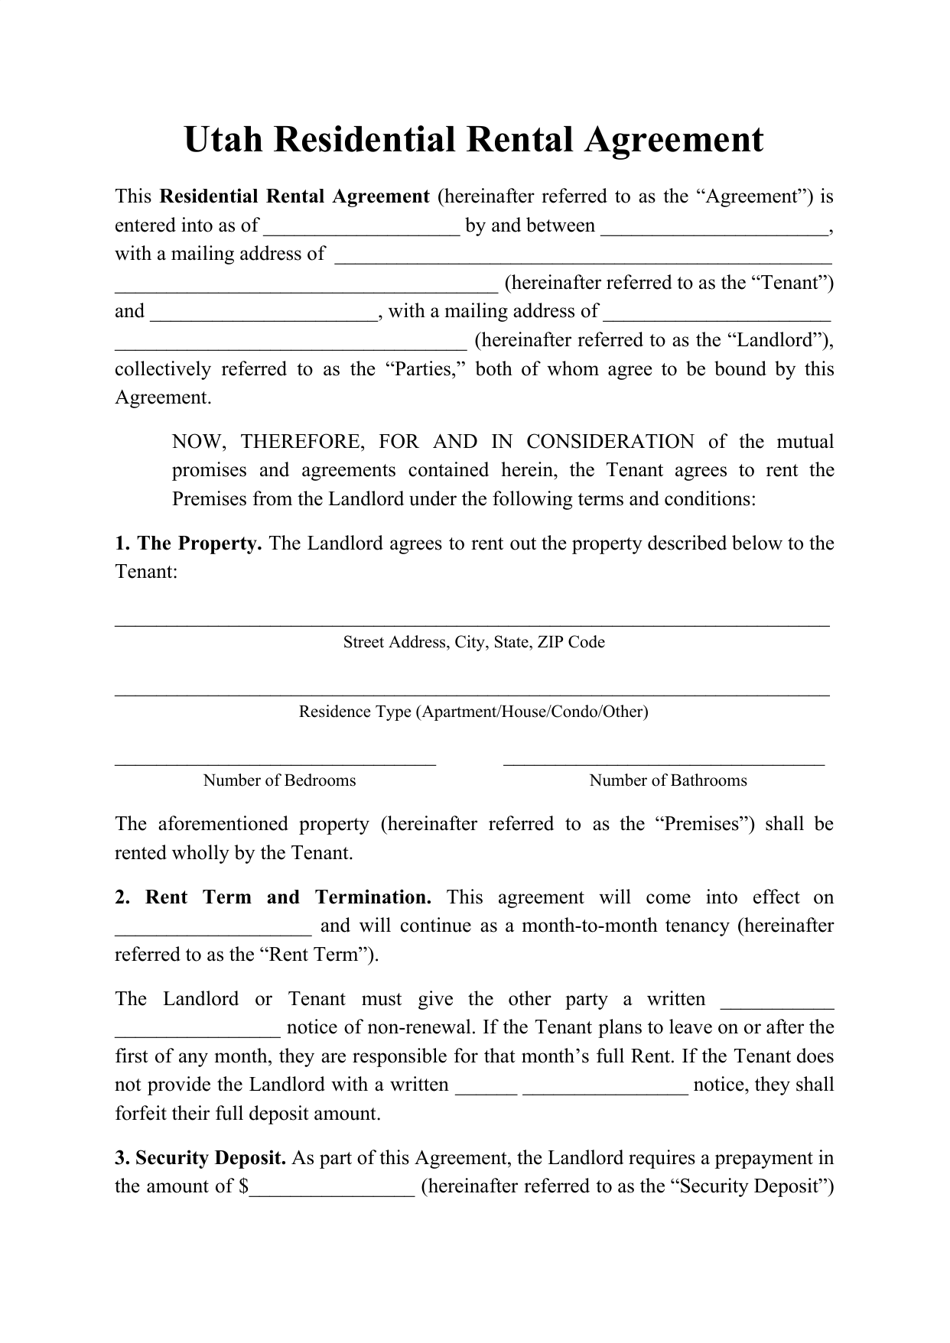 Residential Rental Agreement Template - Thirty Five Points - Utah, Page 1